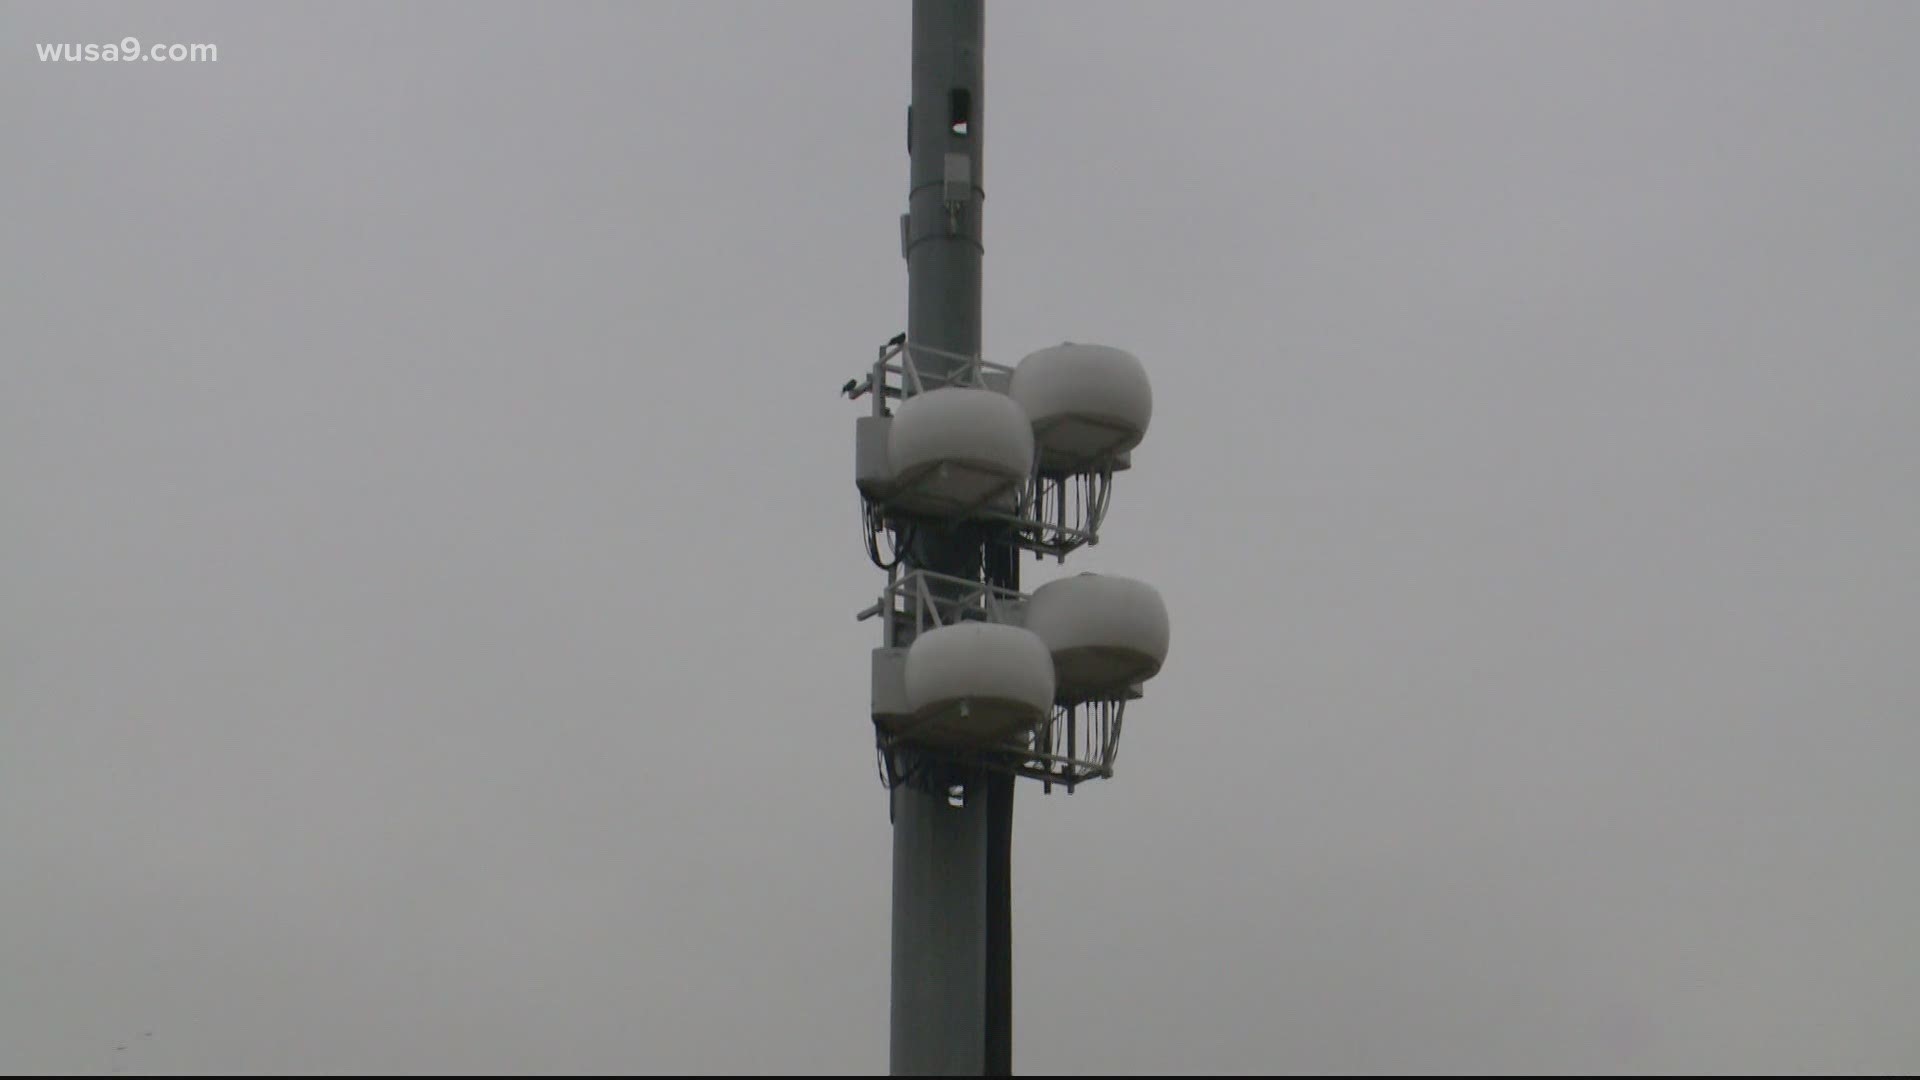 Those radar looking cell towers are called COWS and are temporary cell sites put up ahead of Inauguration Day.